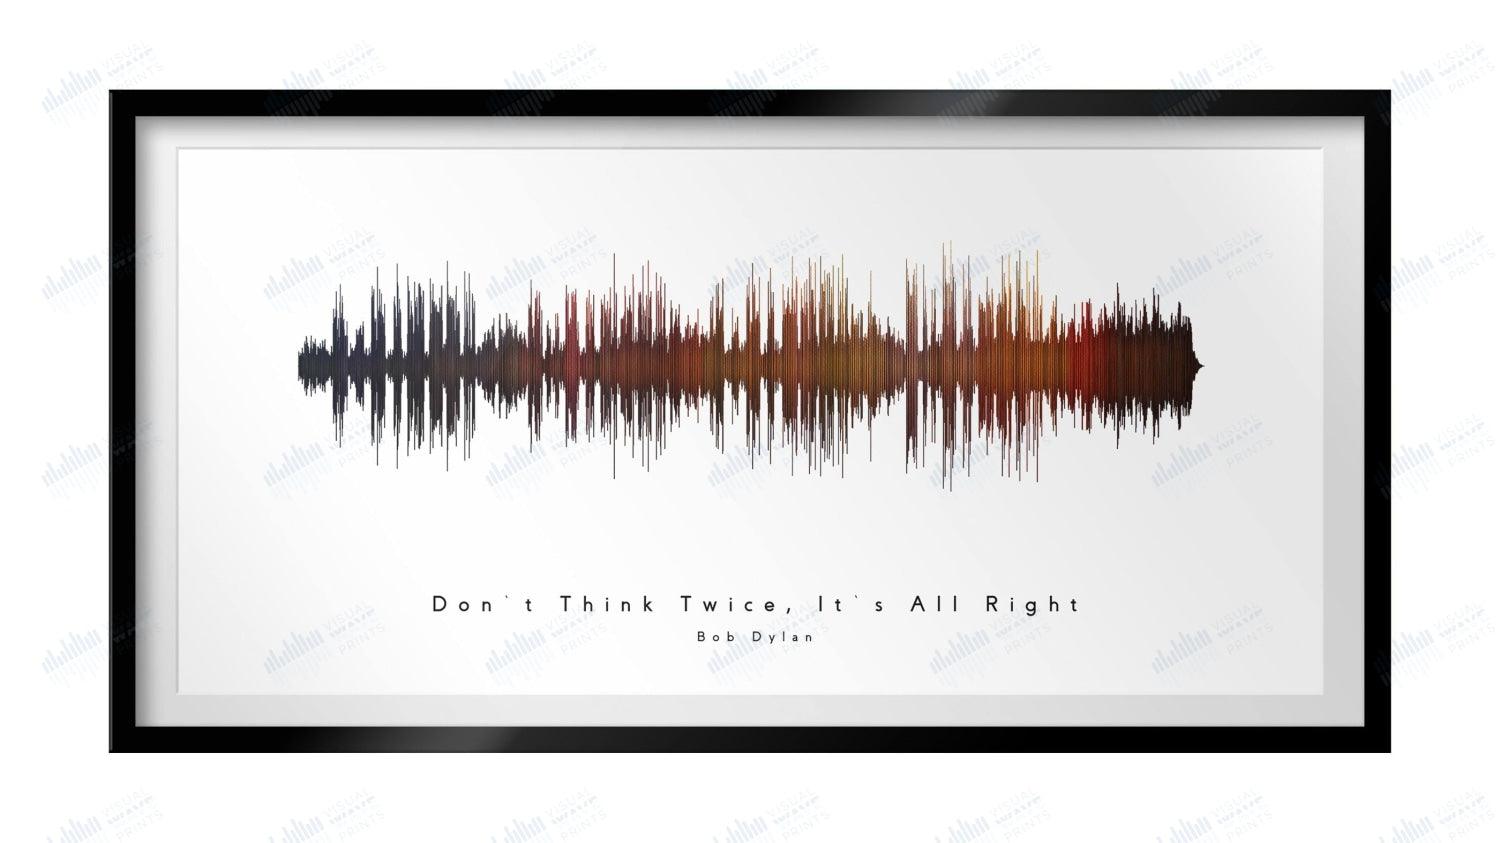 http://visualwaveprints.com/cdn/shop/products/dont-think-twice-its-all-right-by-bob-dylan-matted-framed-7200x3600-24x12-fine-art-608.jpg?v=1676585018